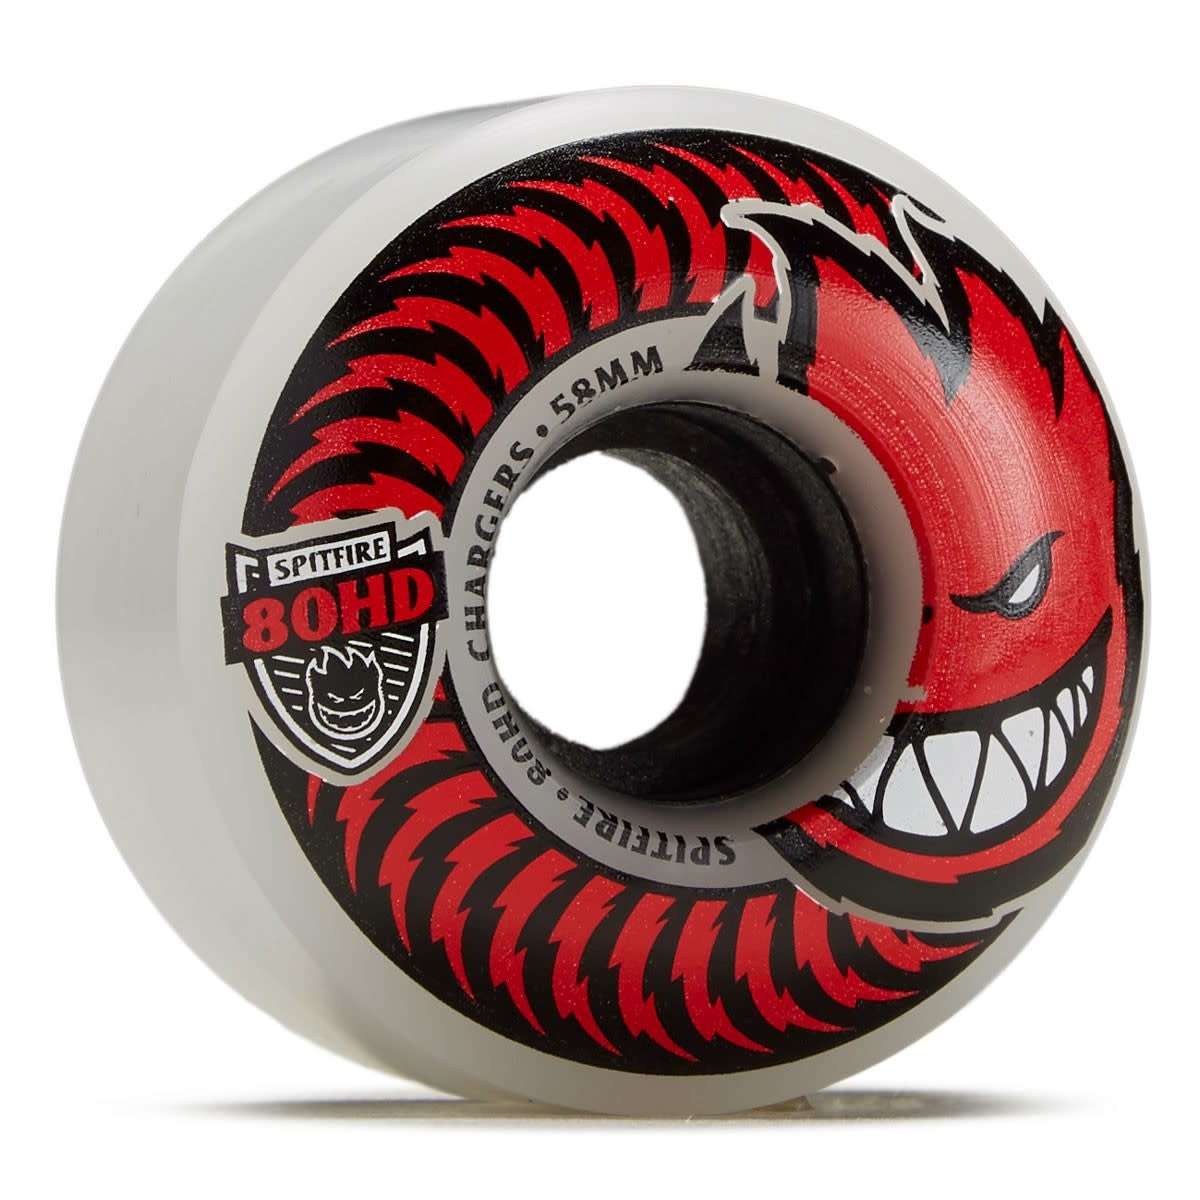 Spitfire Classic Charger Wheels 58mm 80HD